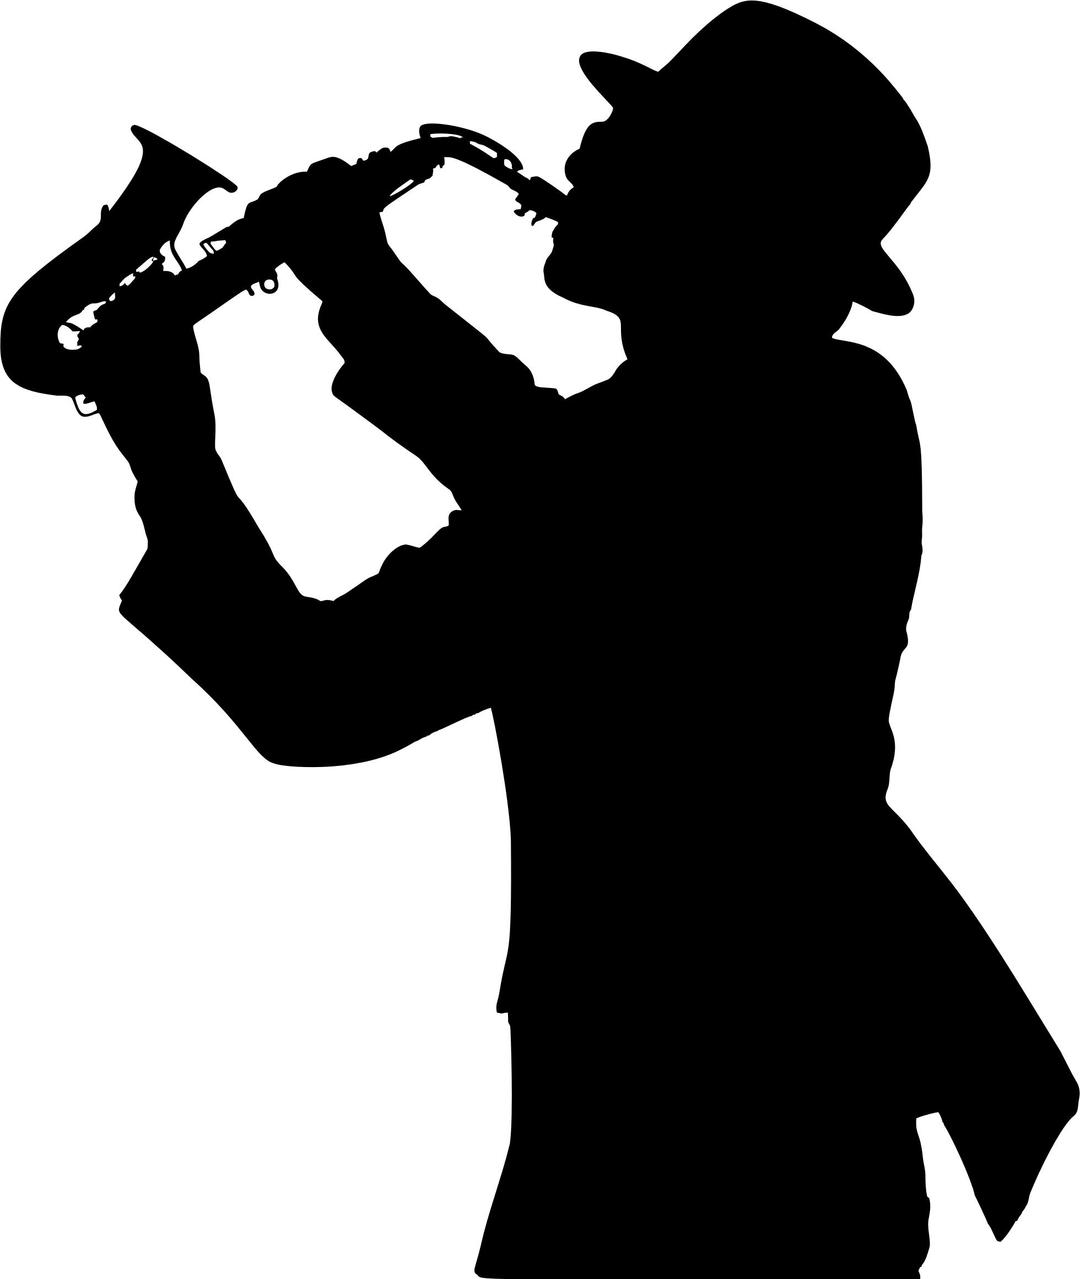 Saxophone Player Silhouette png transparent